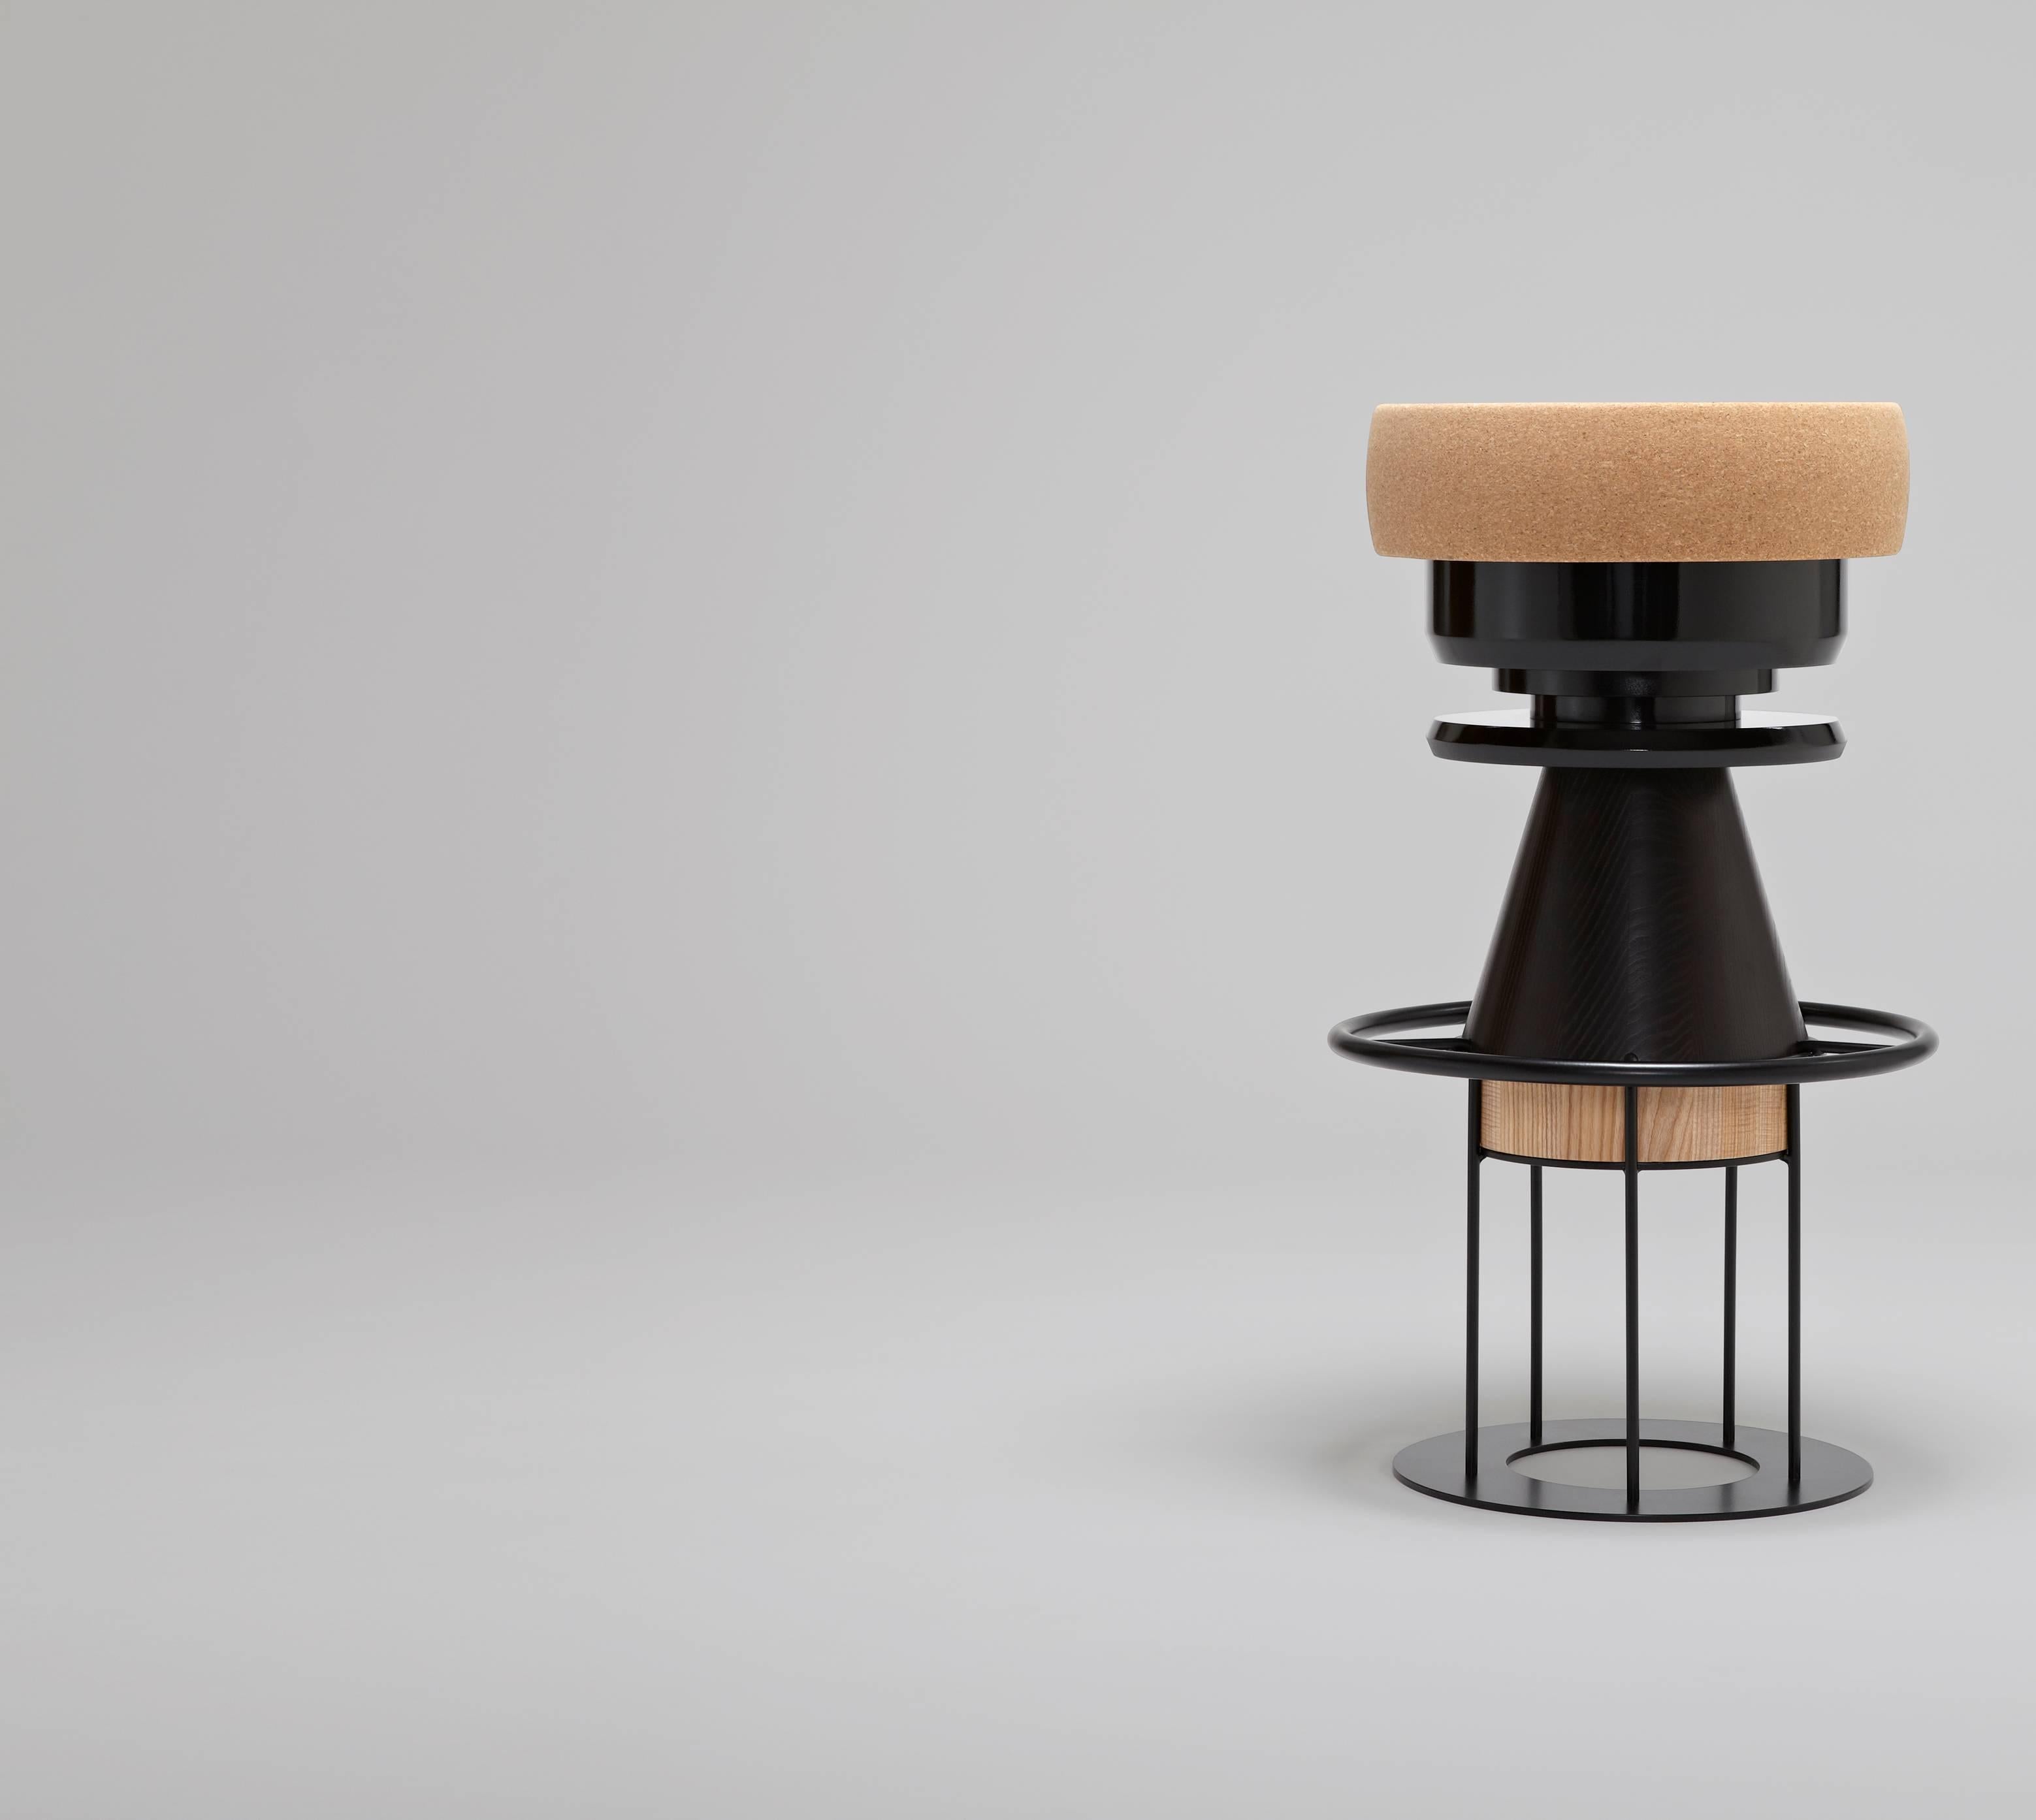 Black Tembo stool, note design studio

Measures: Height 19 inches (low stool) or 30.3 inches (high stool)
Diameter: 14 inches
Weight: 30.8 lbs (low stool) or 37.5 lbs (high stool)

Materials and construction: Lacquered steel structure, solid